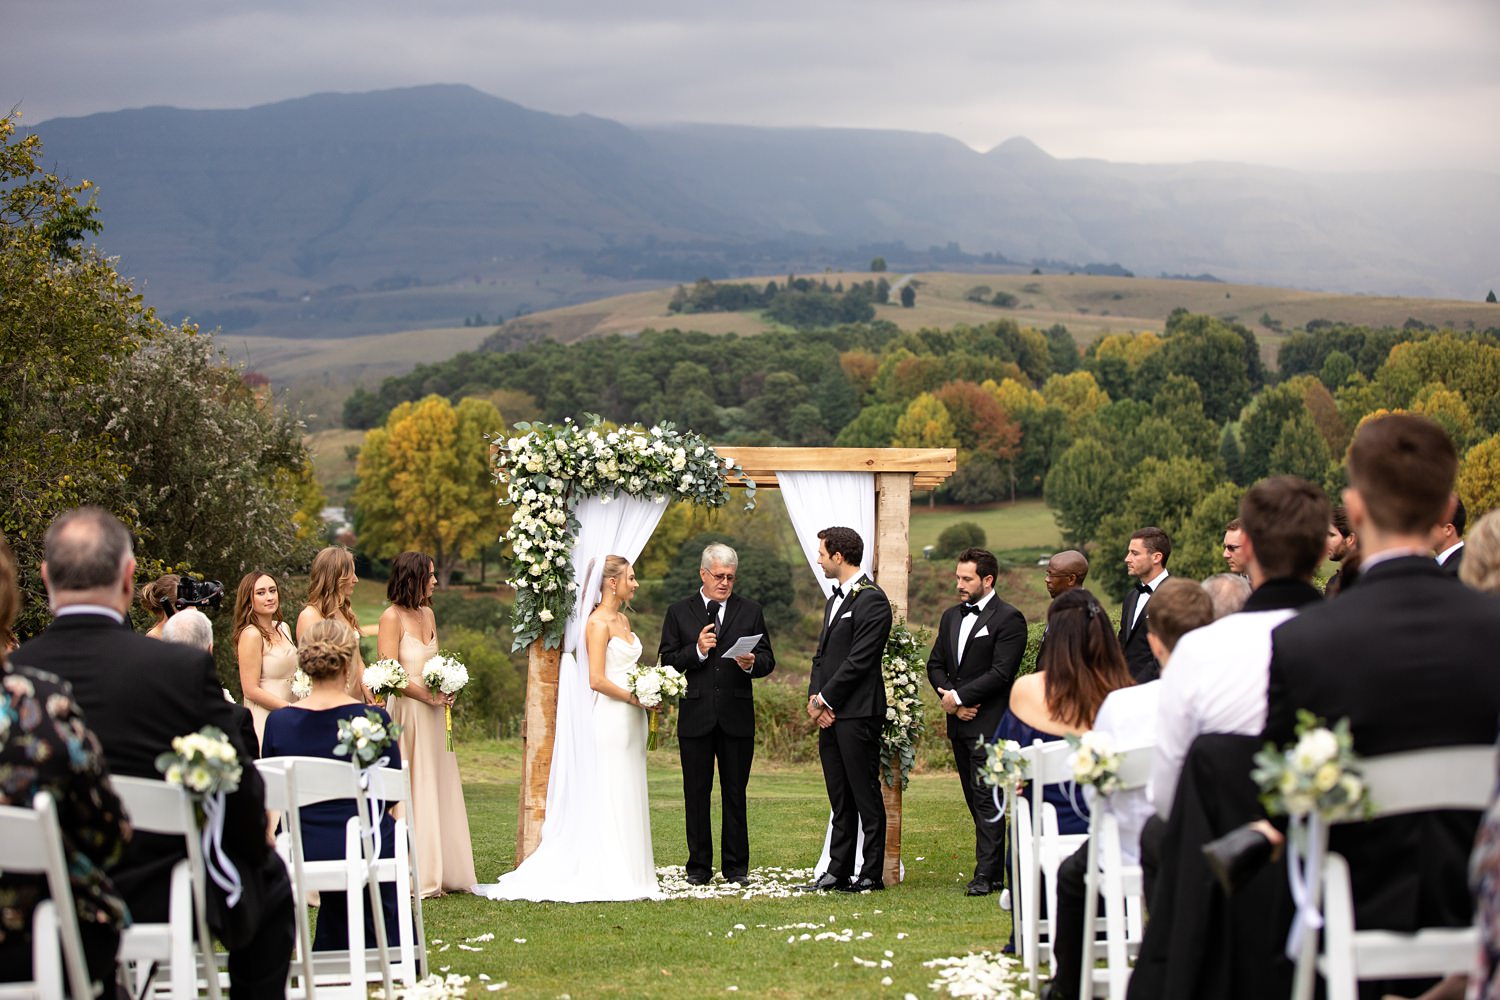 A Champagne Sports Resort wedding ceremony with Cathkin Peak in the background and dark clouds looming.